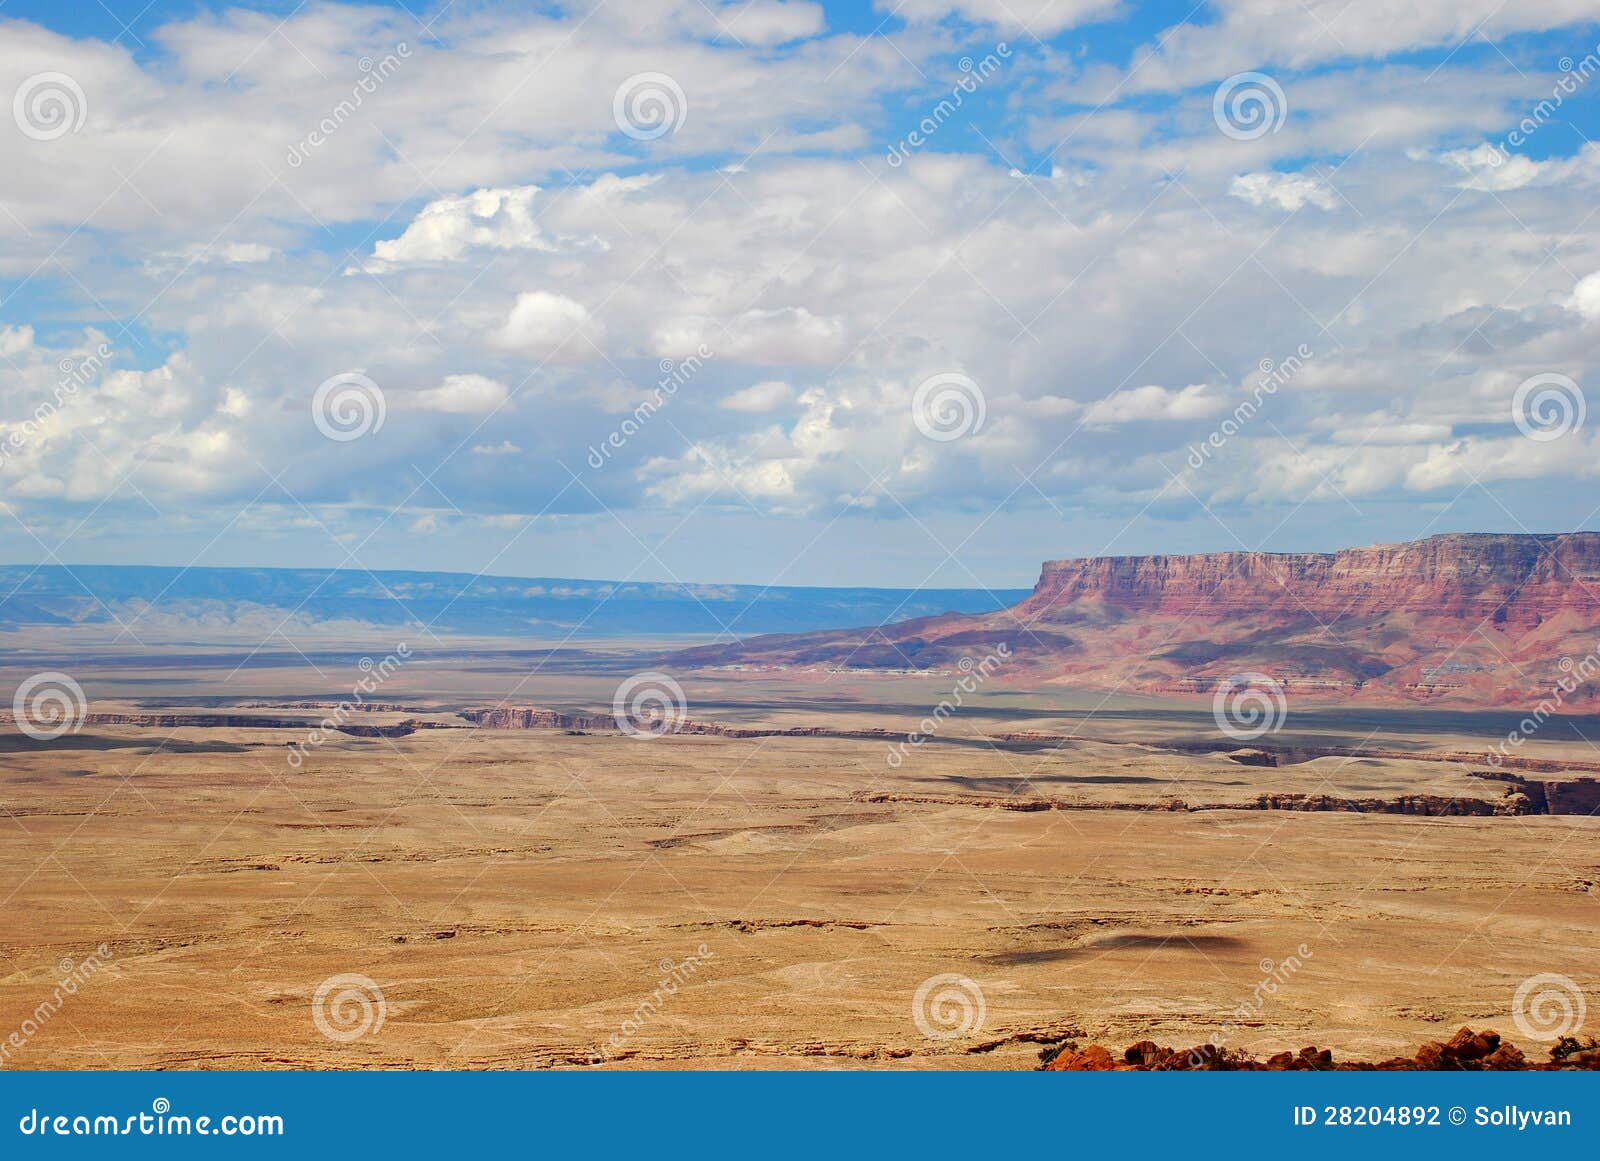 heavenly view of plains and plateaus of arizona